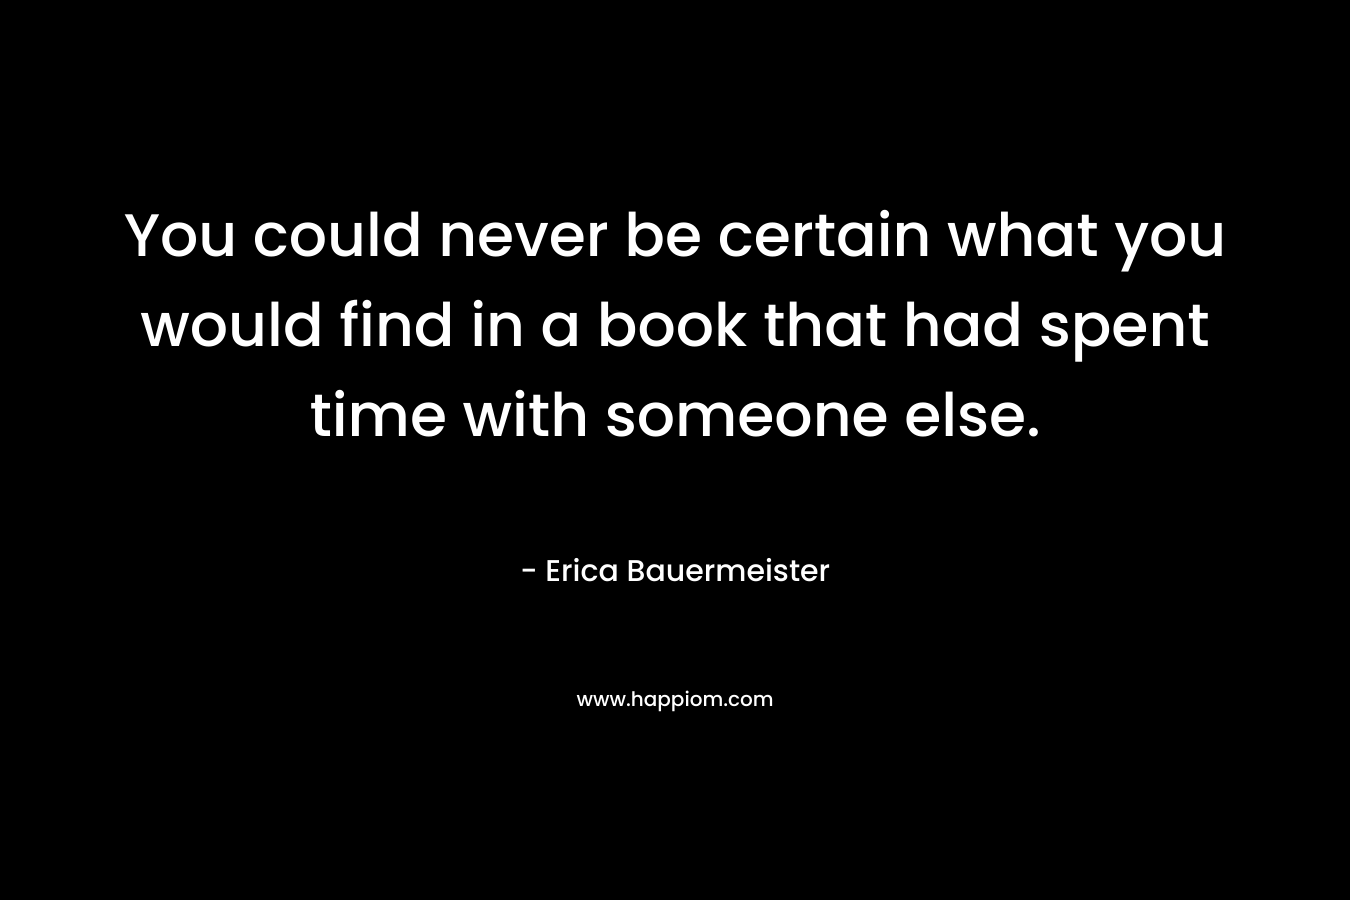 You could never be certain what you would find in a book that had spent time with someone else.